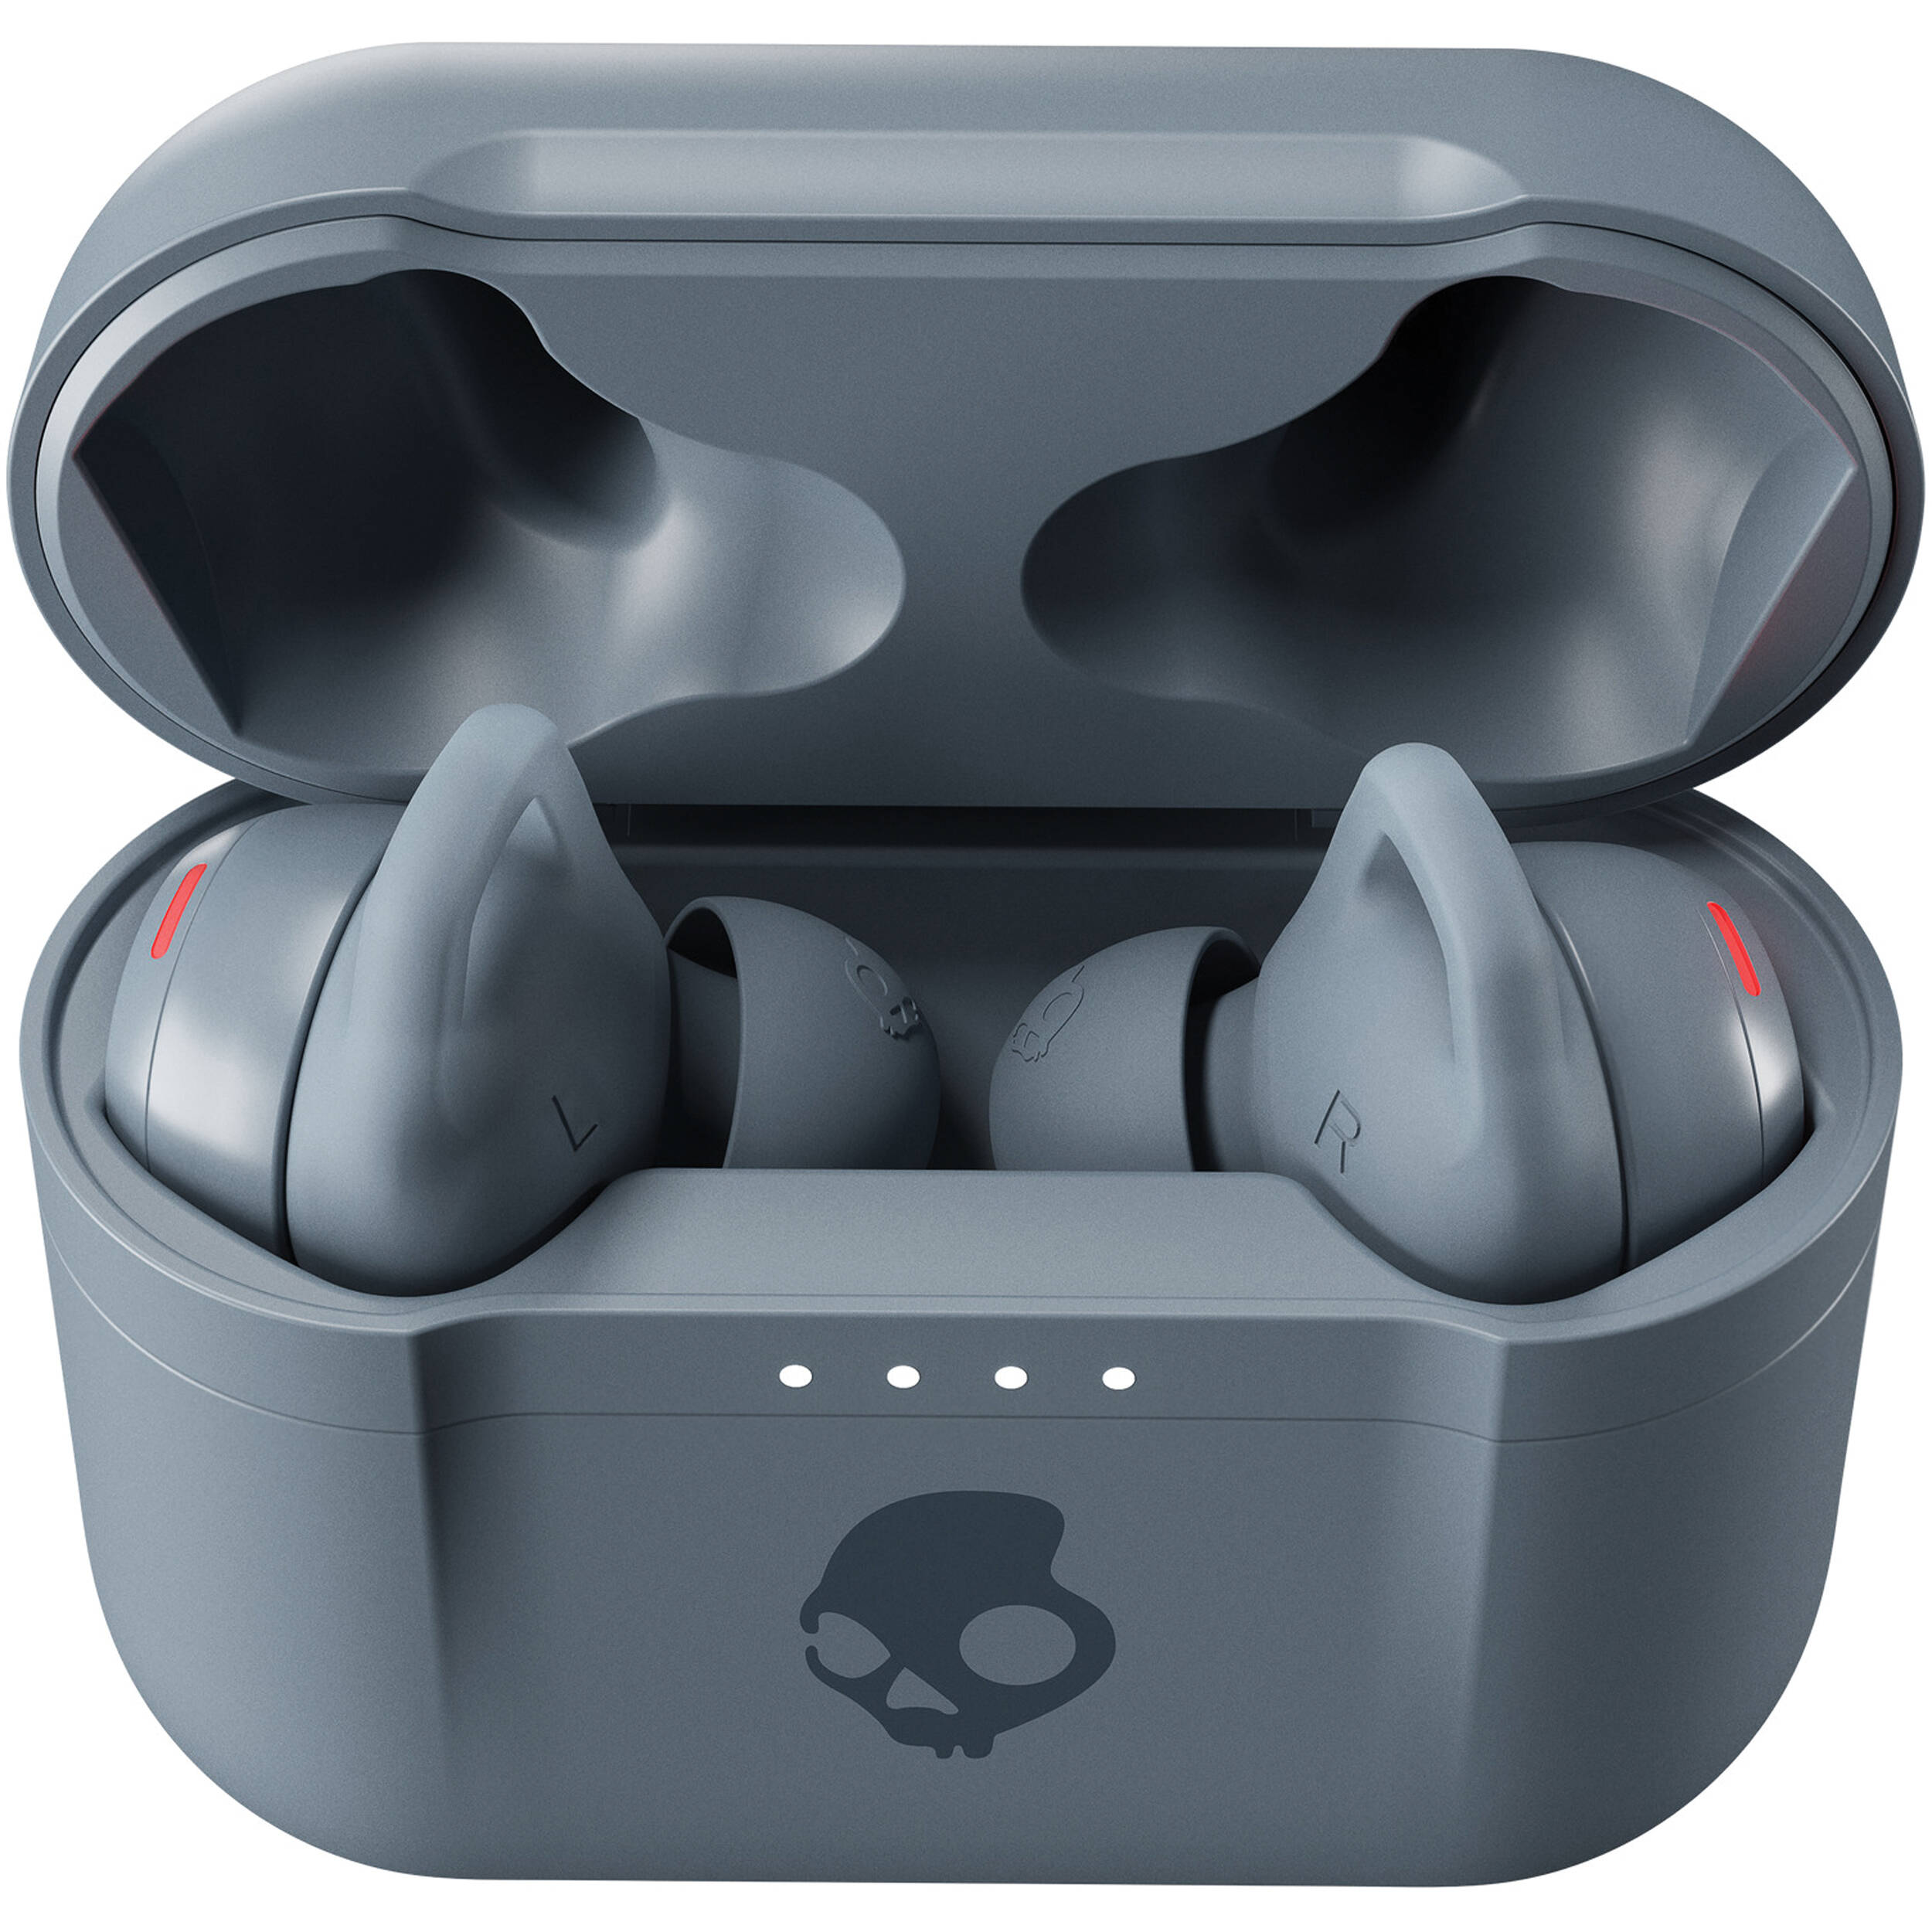 Skullcandy Indy ANC Noise-Canceling True Wireless Earbuds 